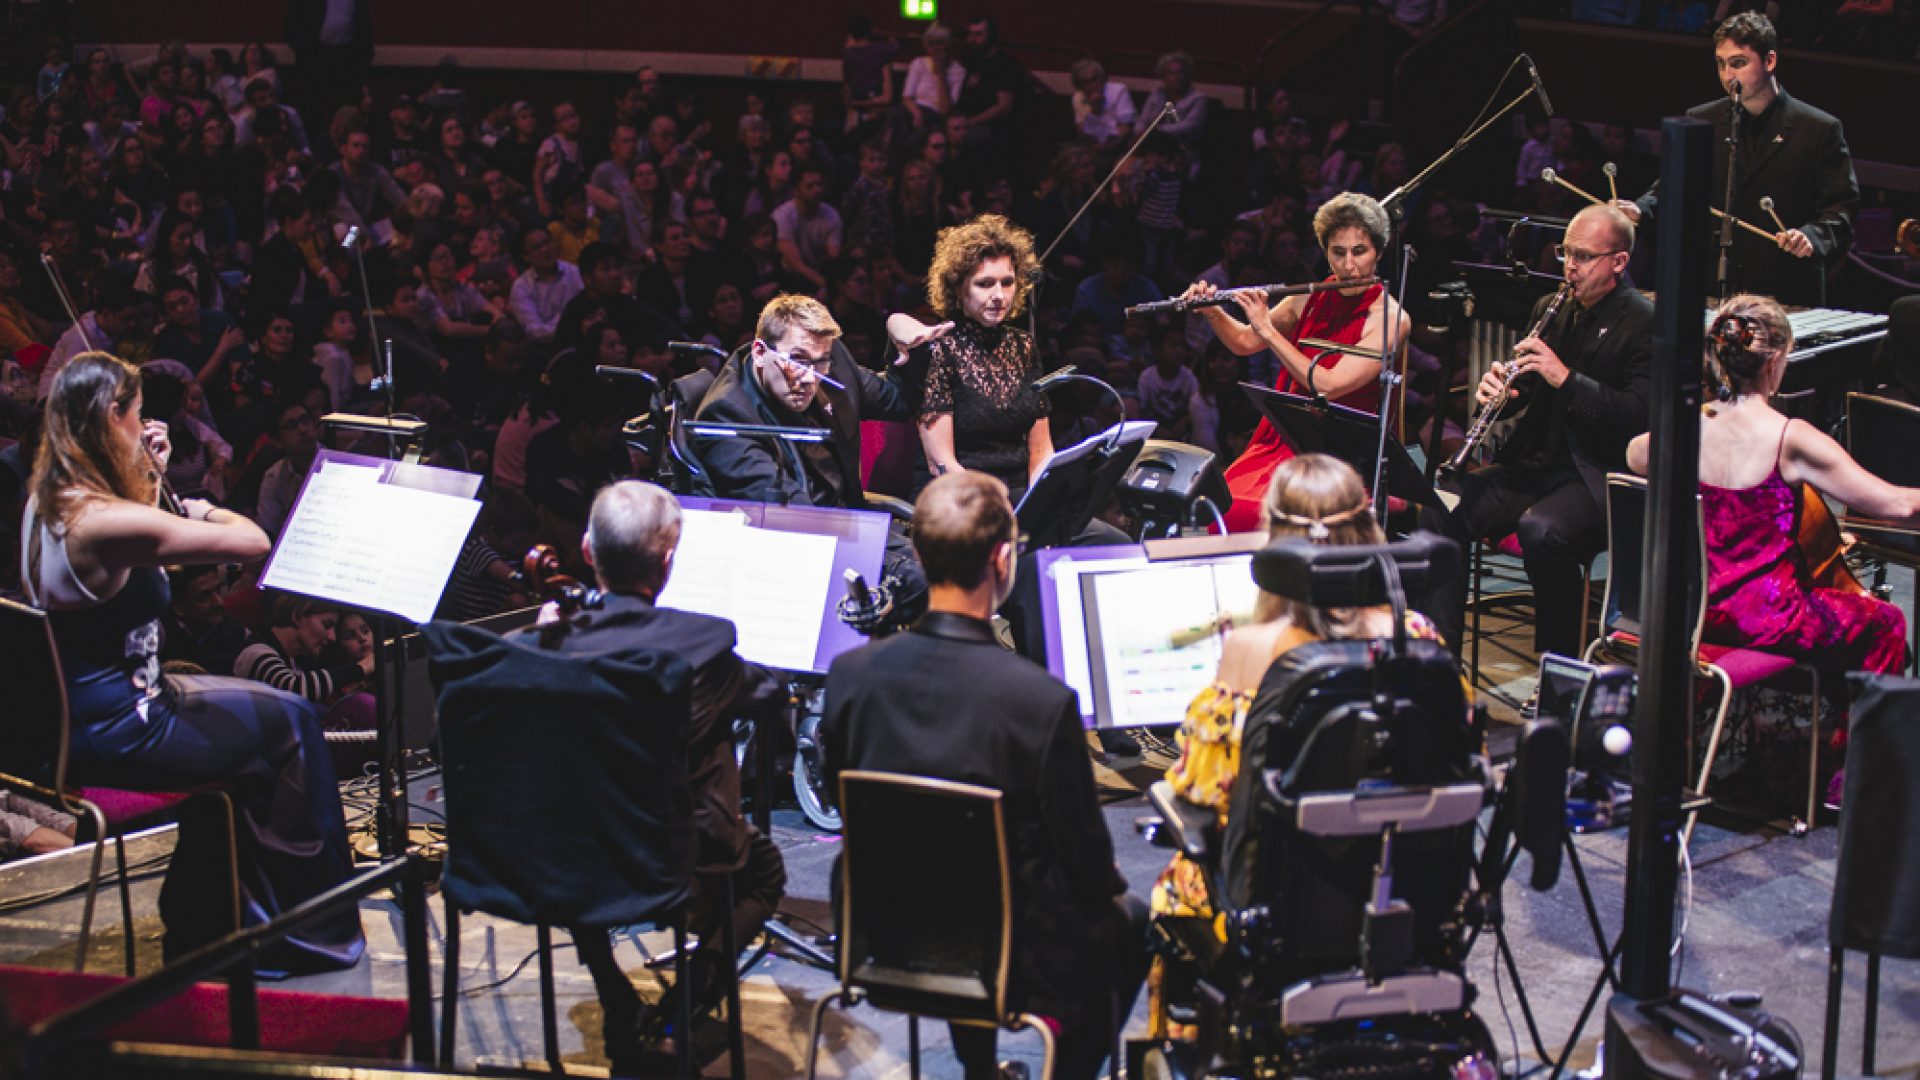 BSO Resound who are nominated for 2 royal philharmonic society awards.